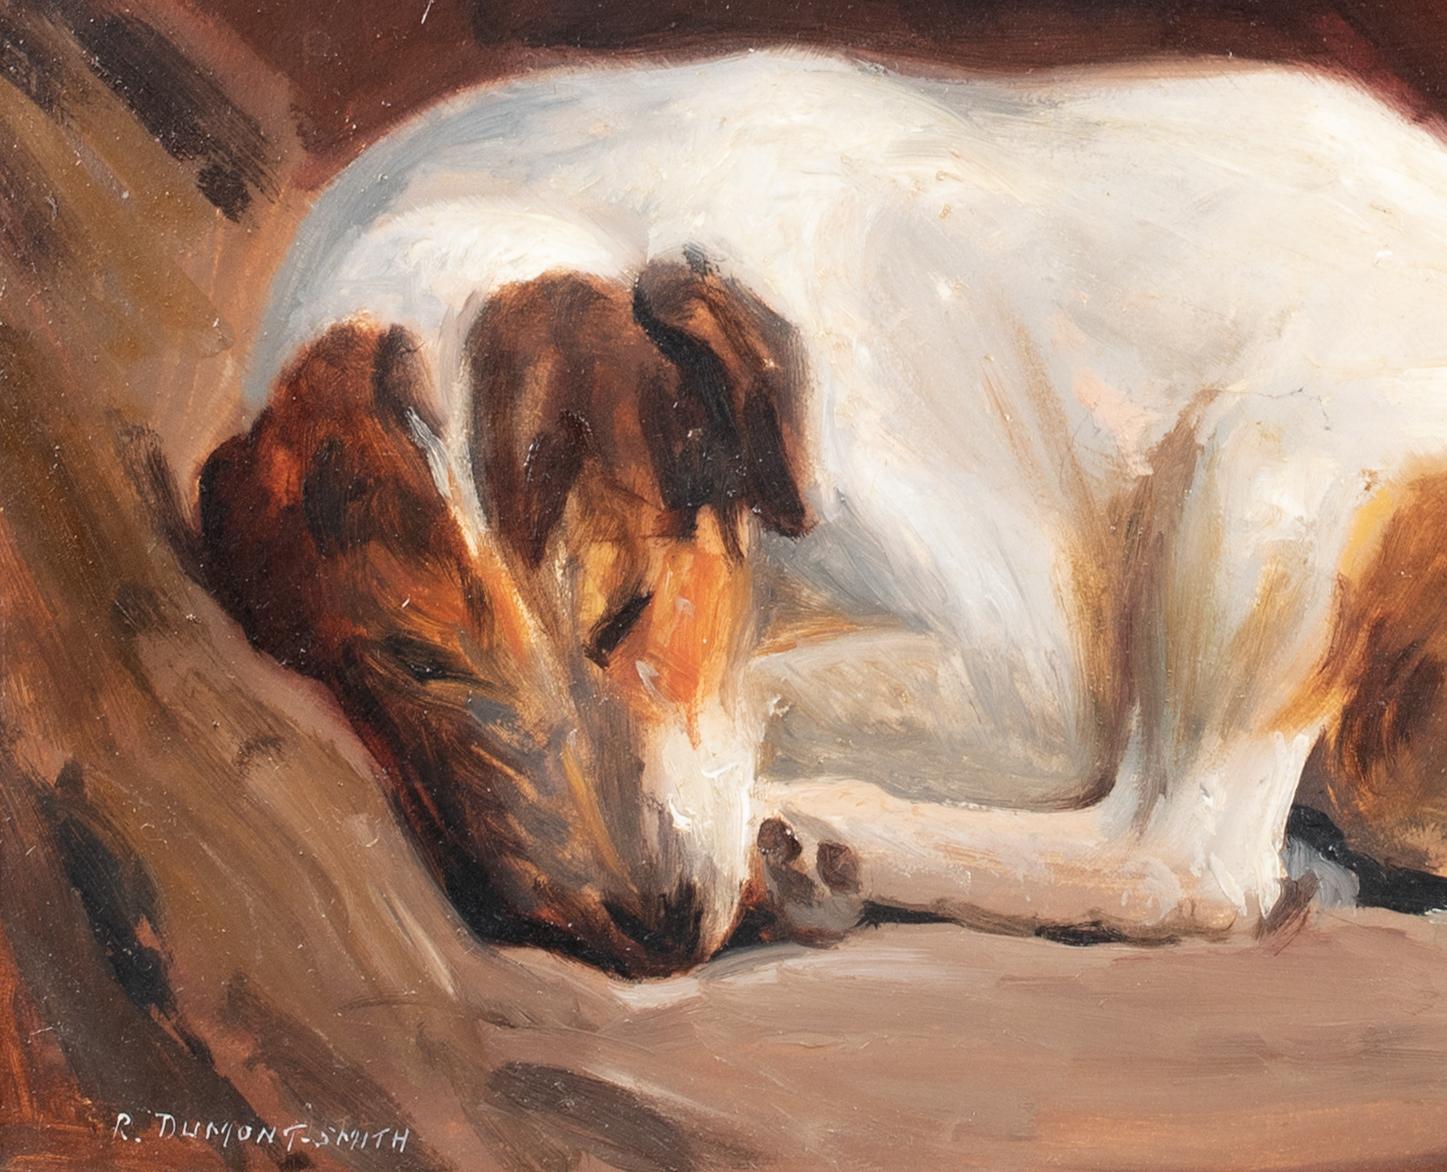 Portrait Of  Sleeping Jack Russell Terrier, circa 1900  by Robert Dumont Smith   2